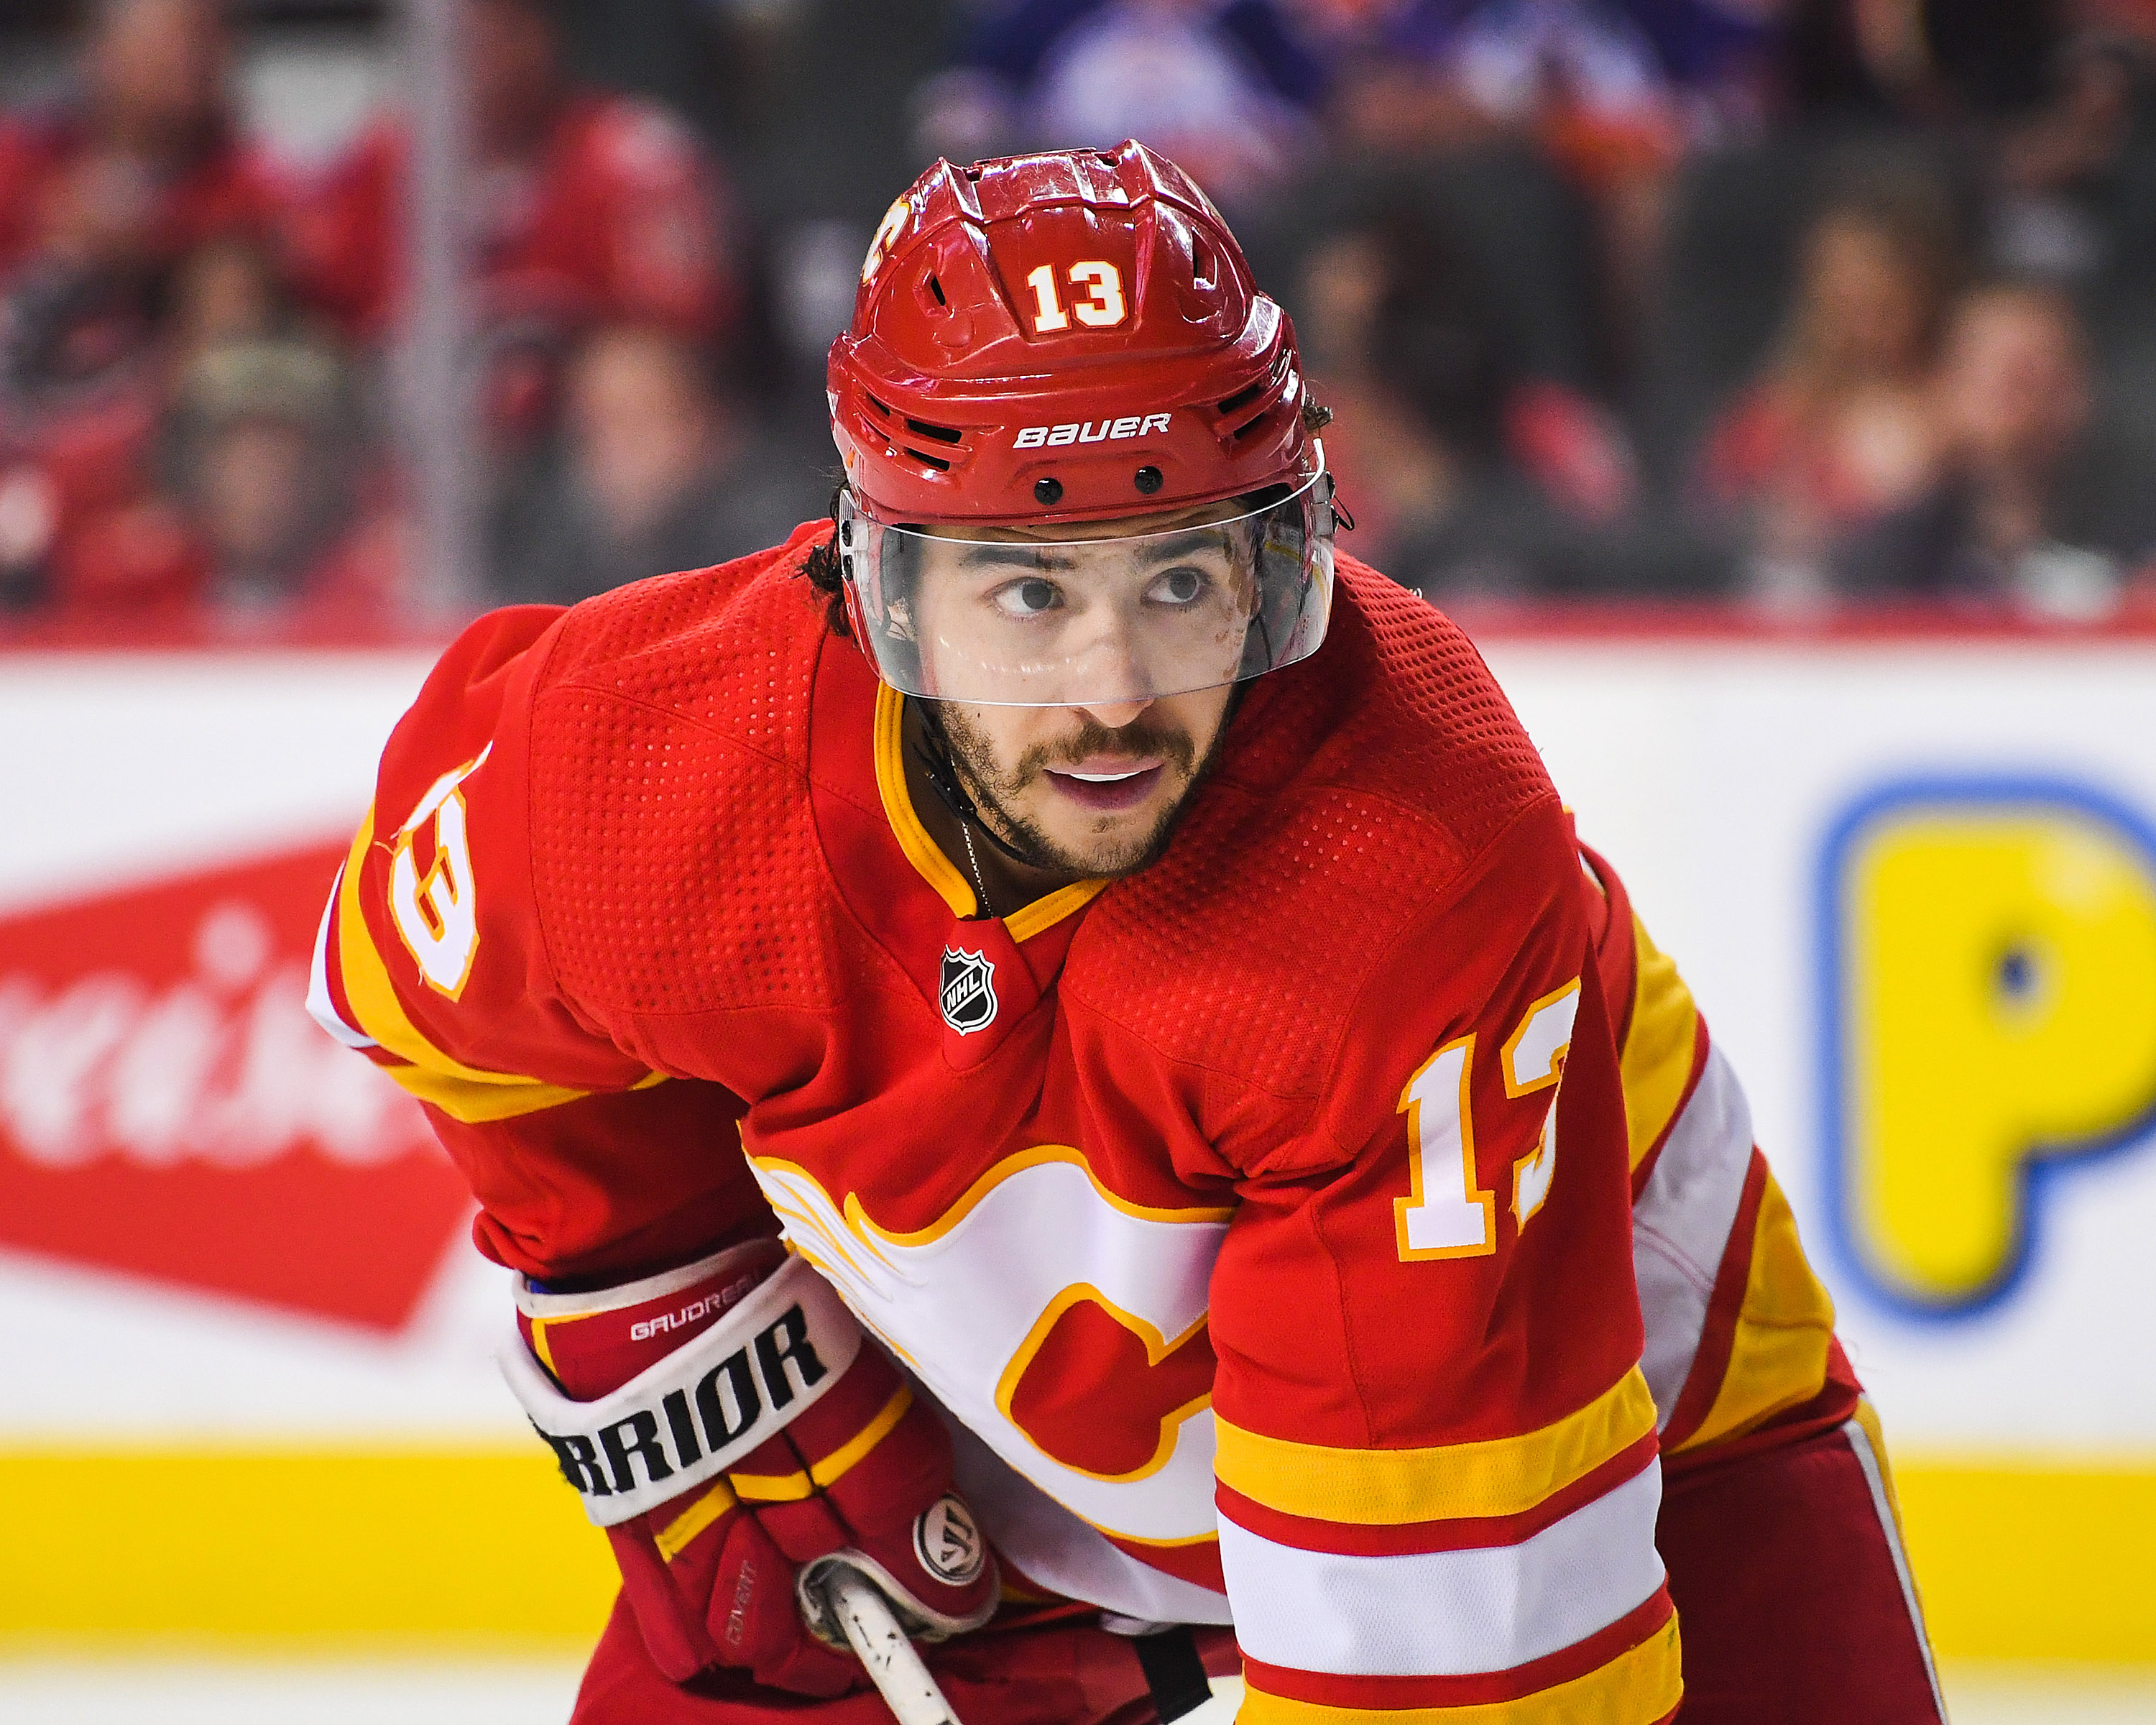 It's Unlikely the Flyers Land Gaudreau